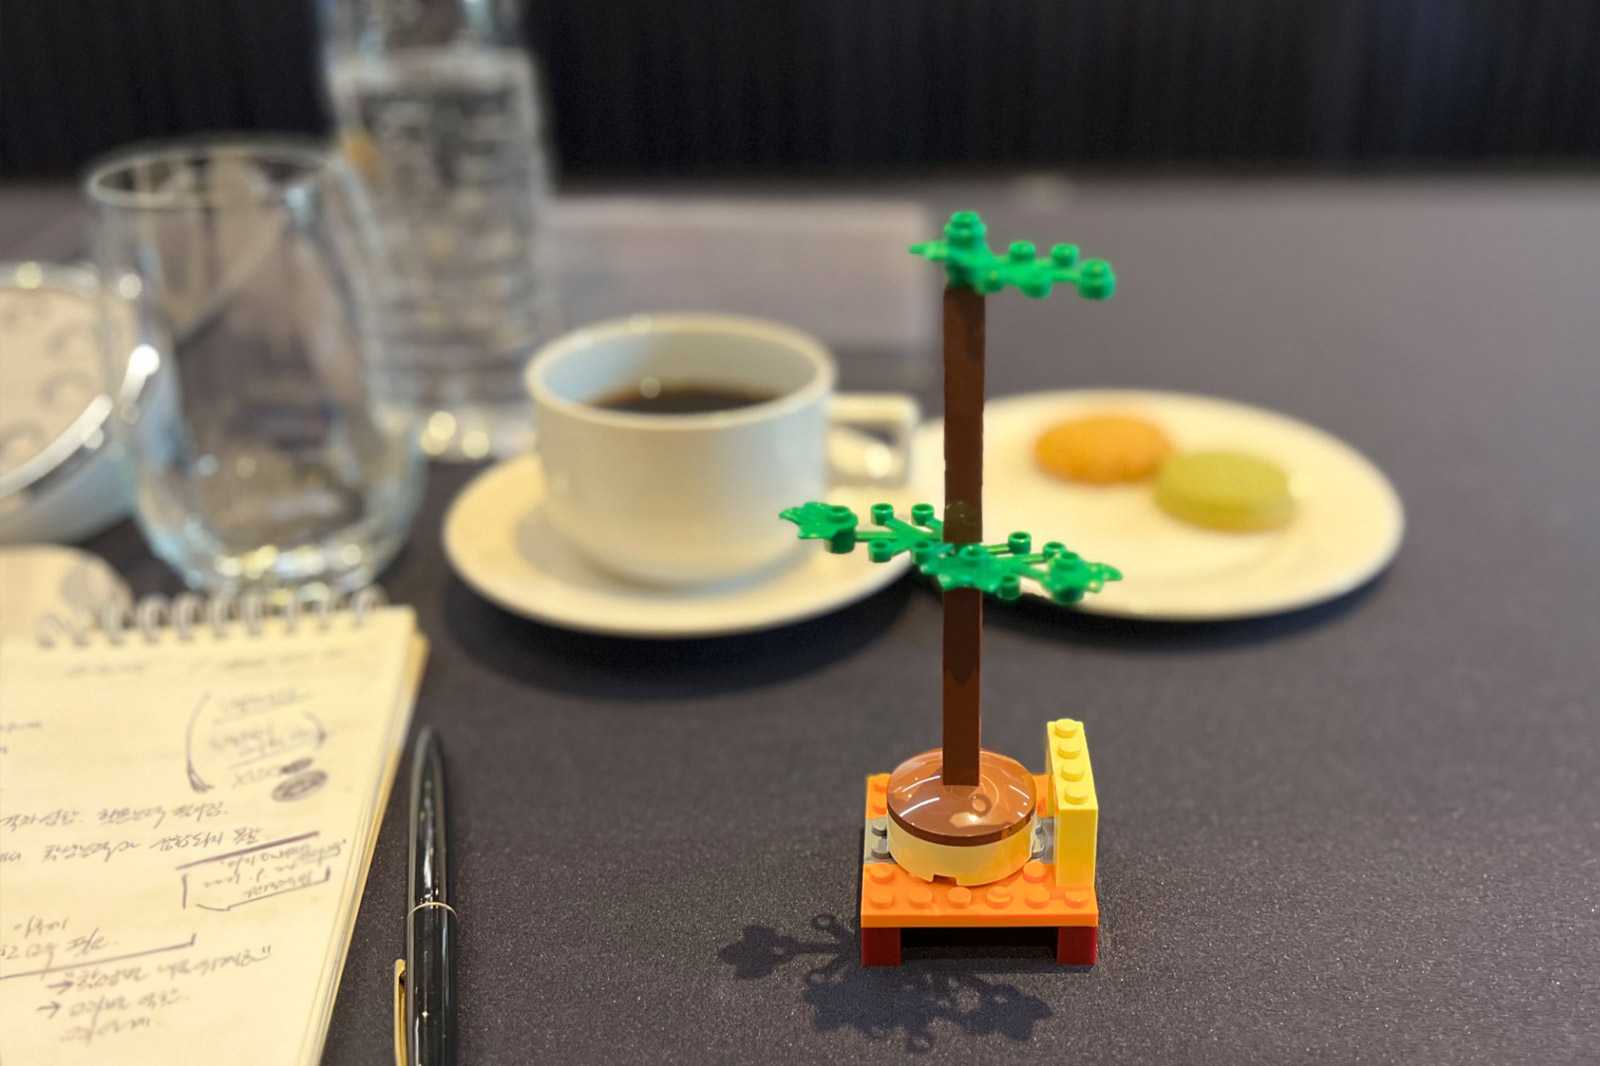 LEGO meeting with LEGO tree